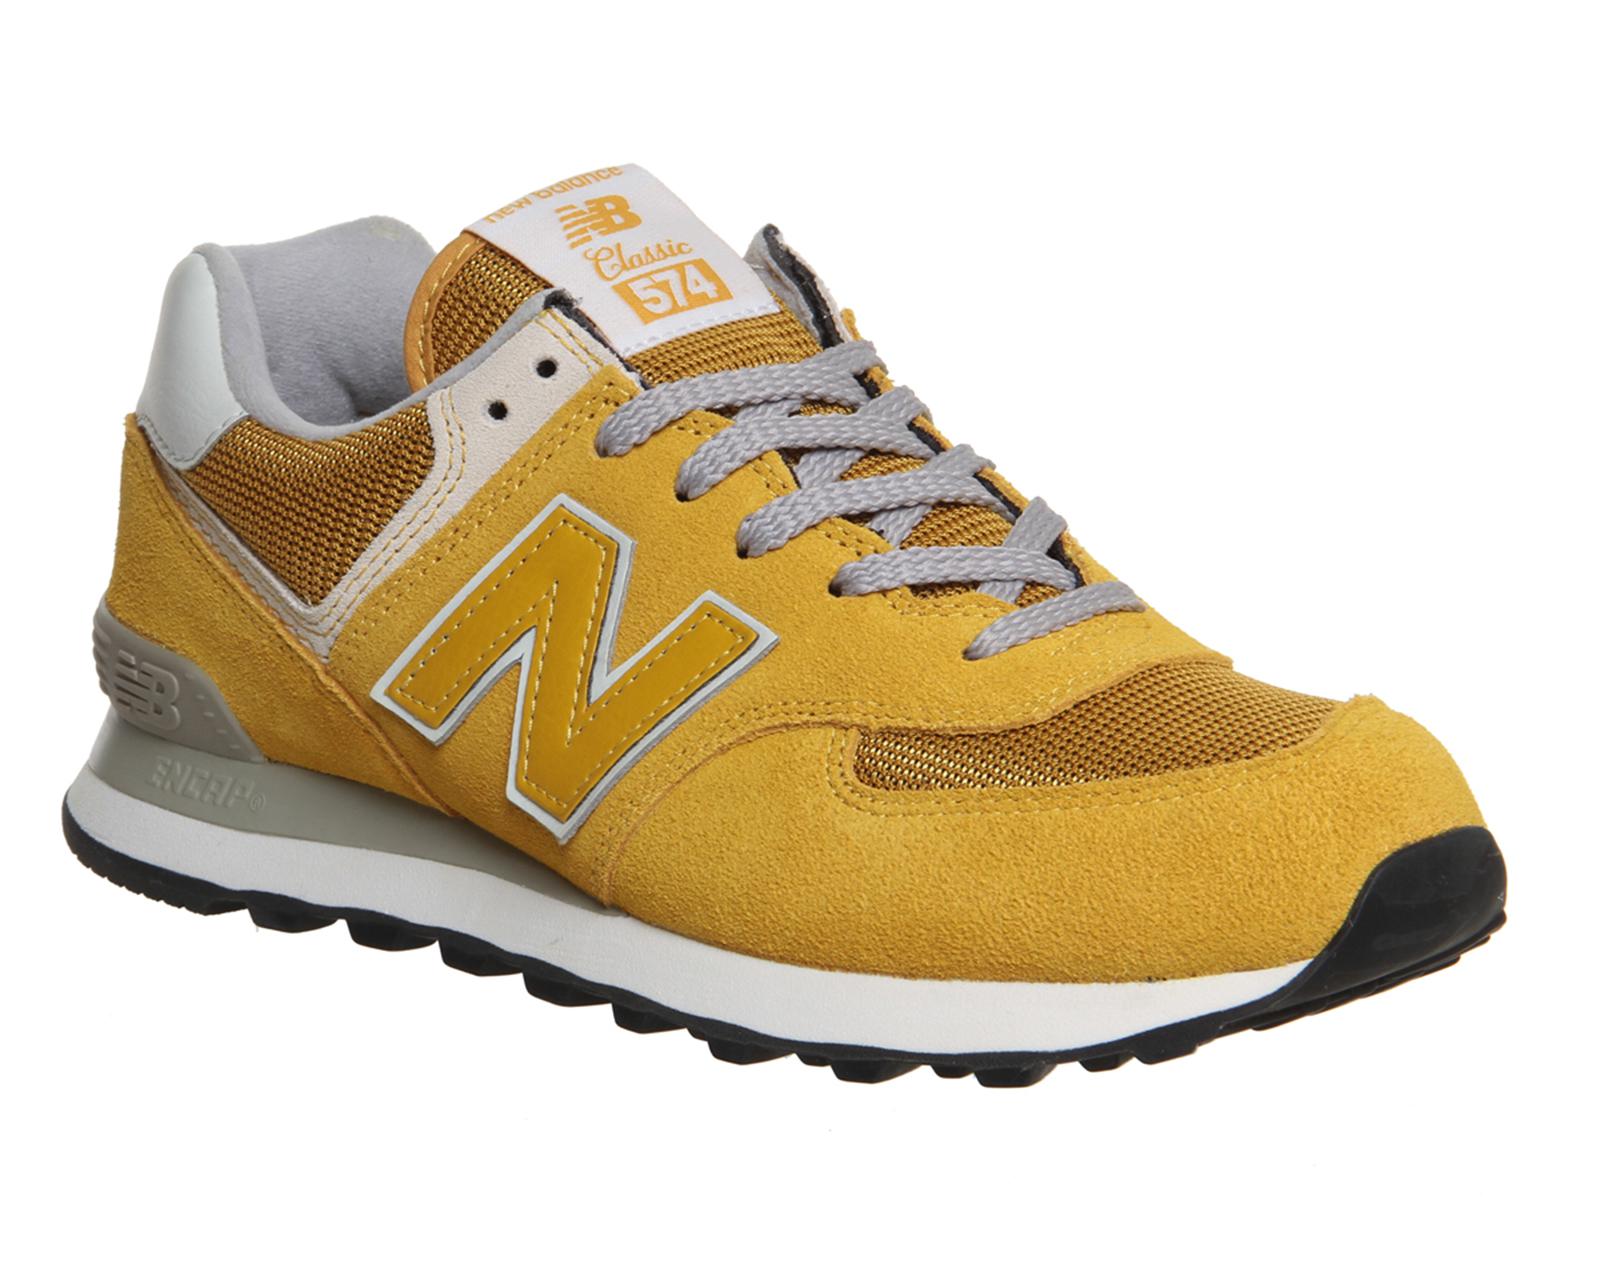 New Balance M574 in Mustard (Yellow) for Men - Lyst